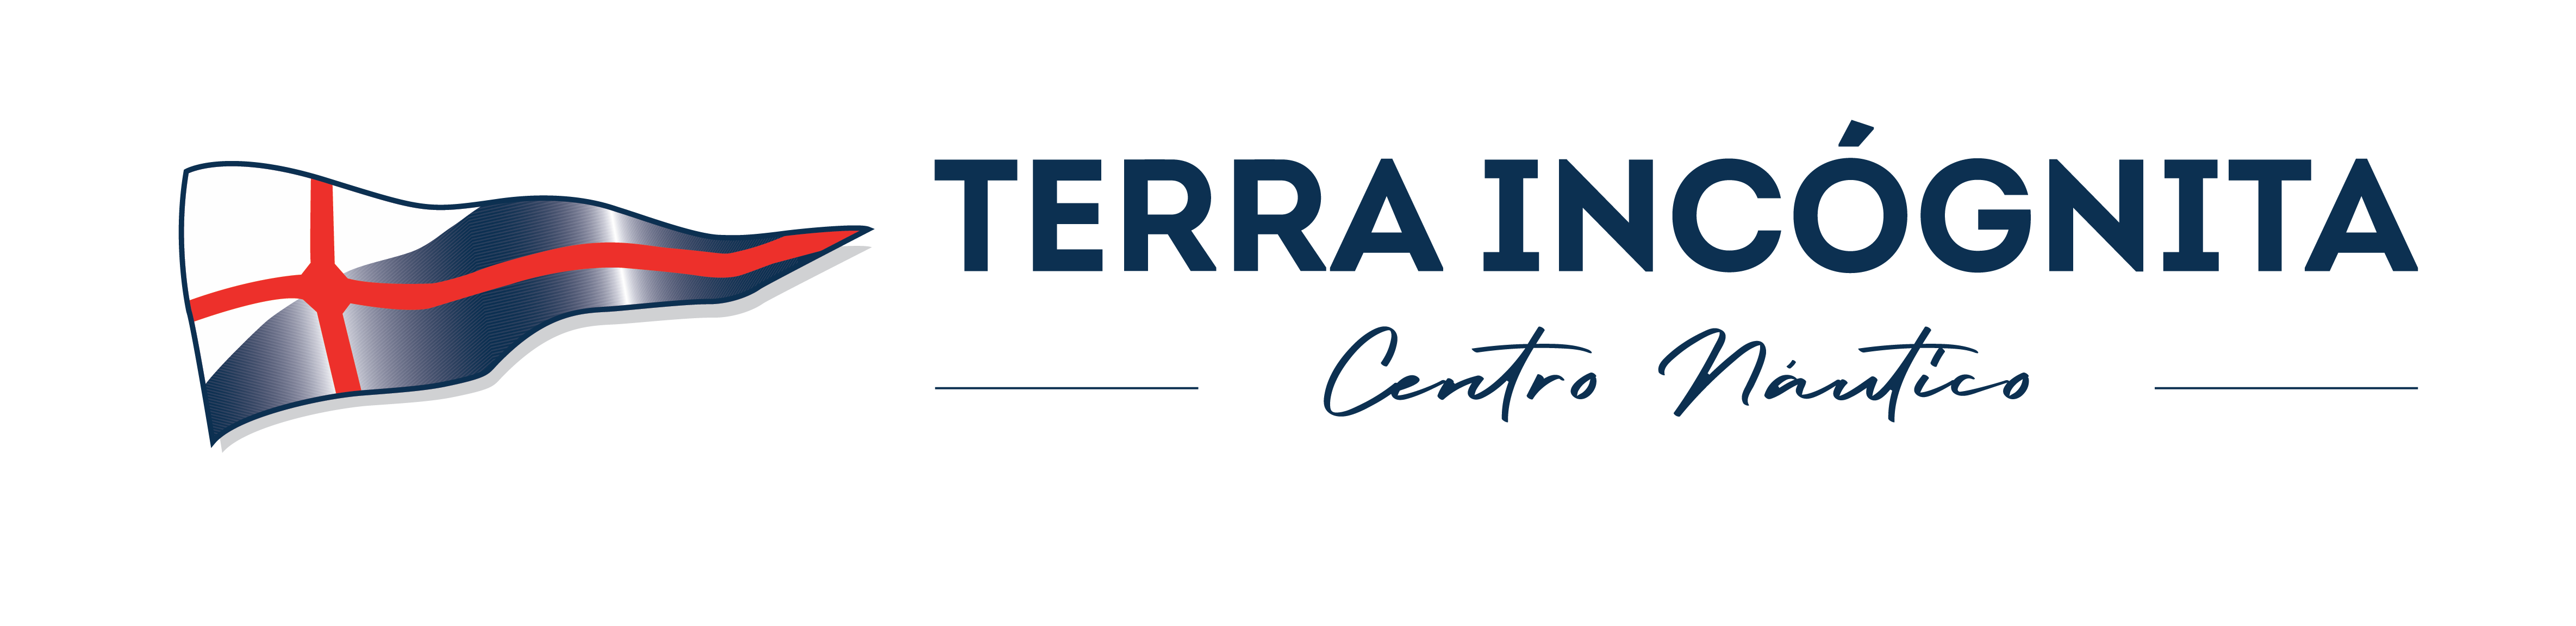 Terra Incógnita nautical centre logo. Contains a triangular pennant with the colours blue, red and white